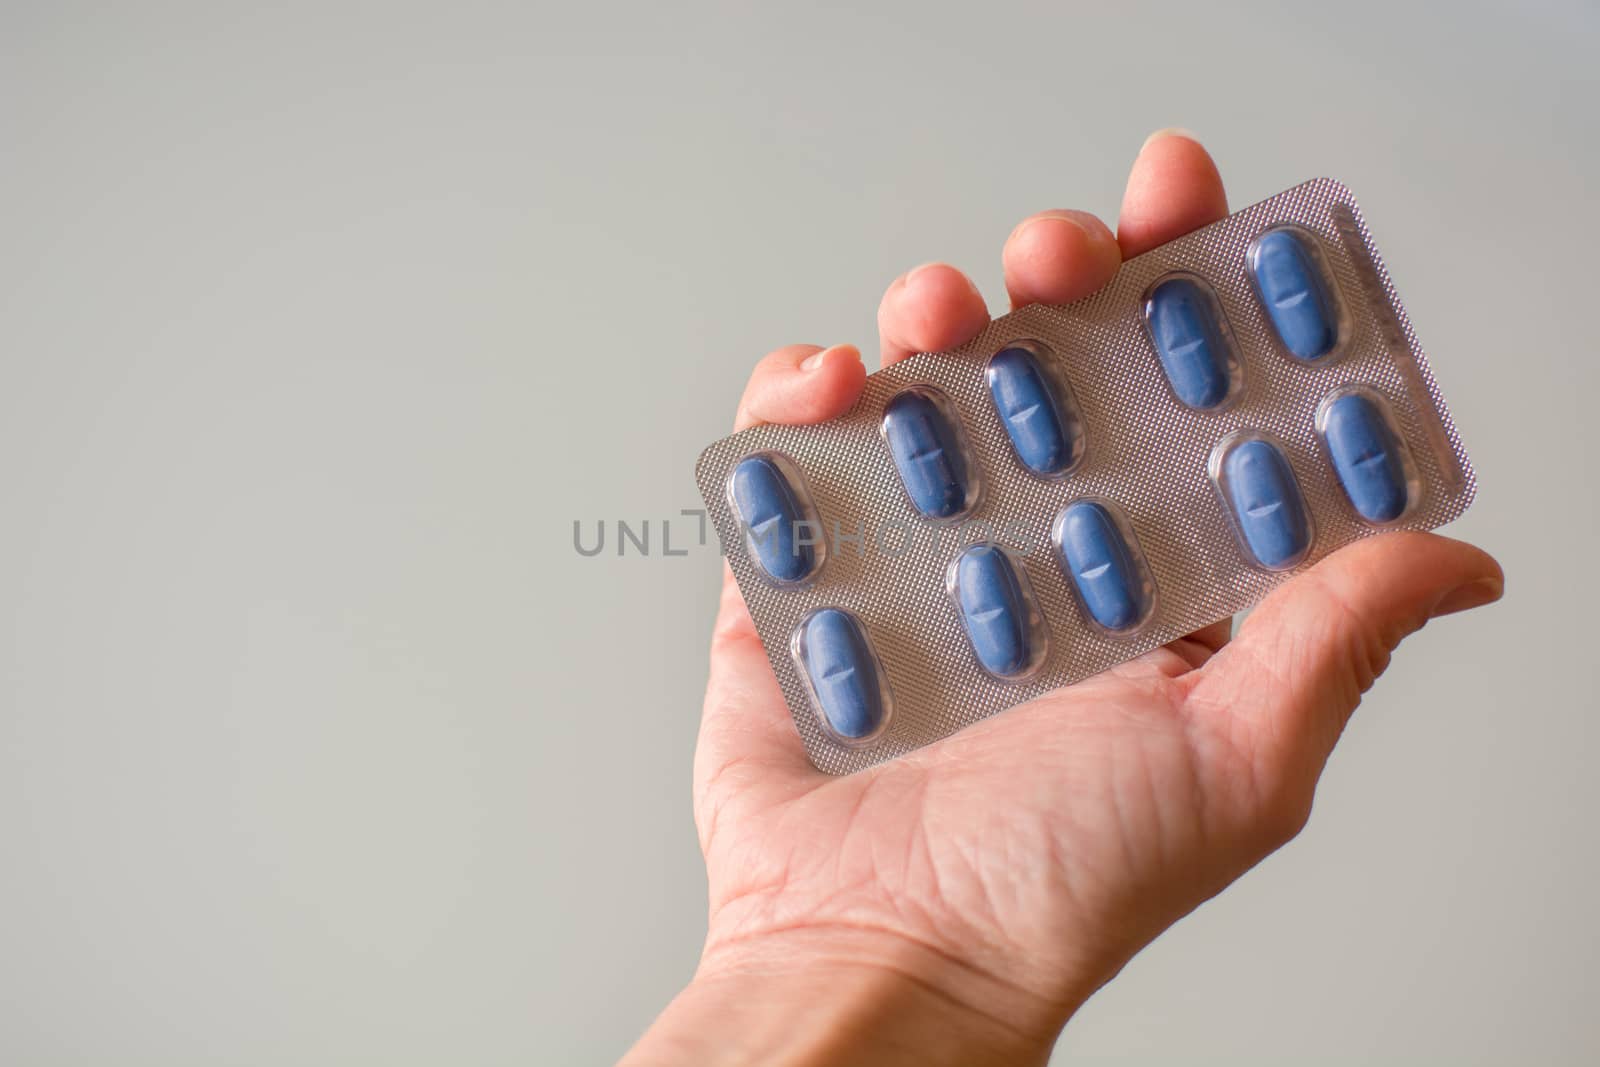 Female hand holding blue medical pills by chandlervid85